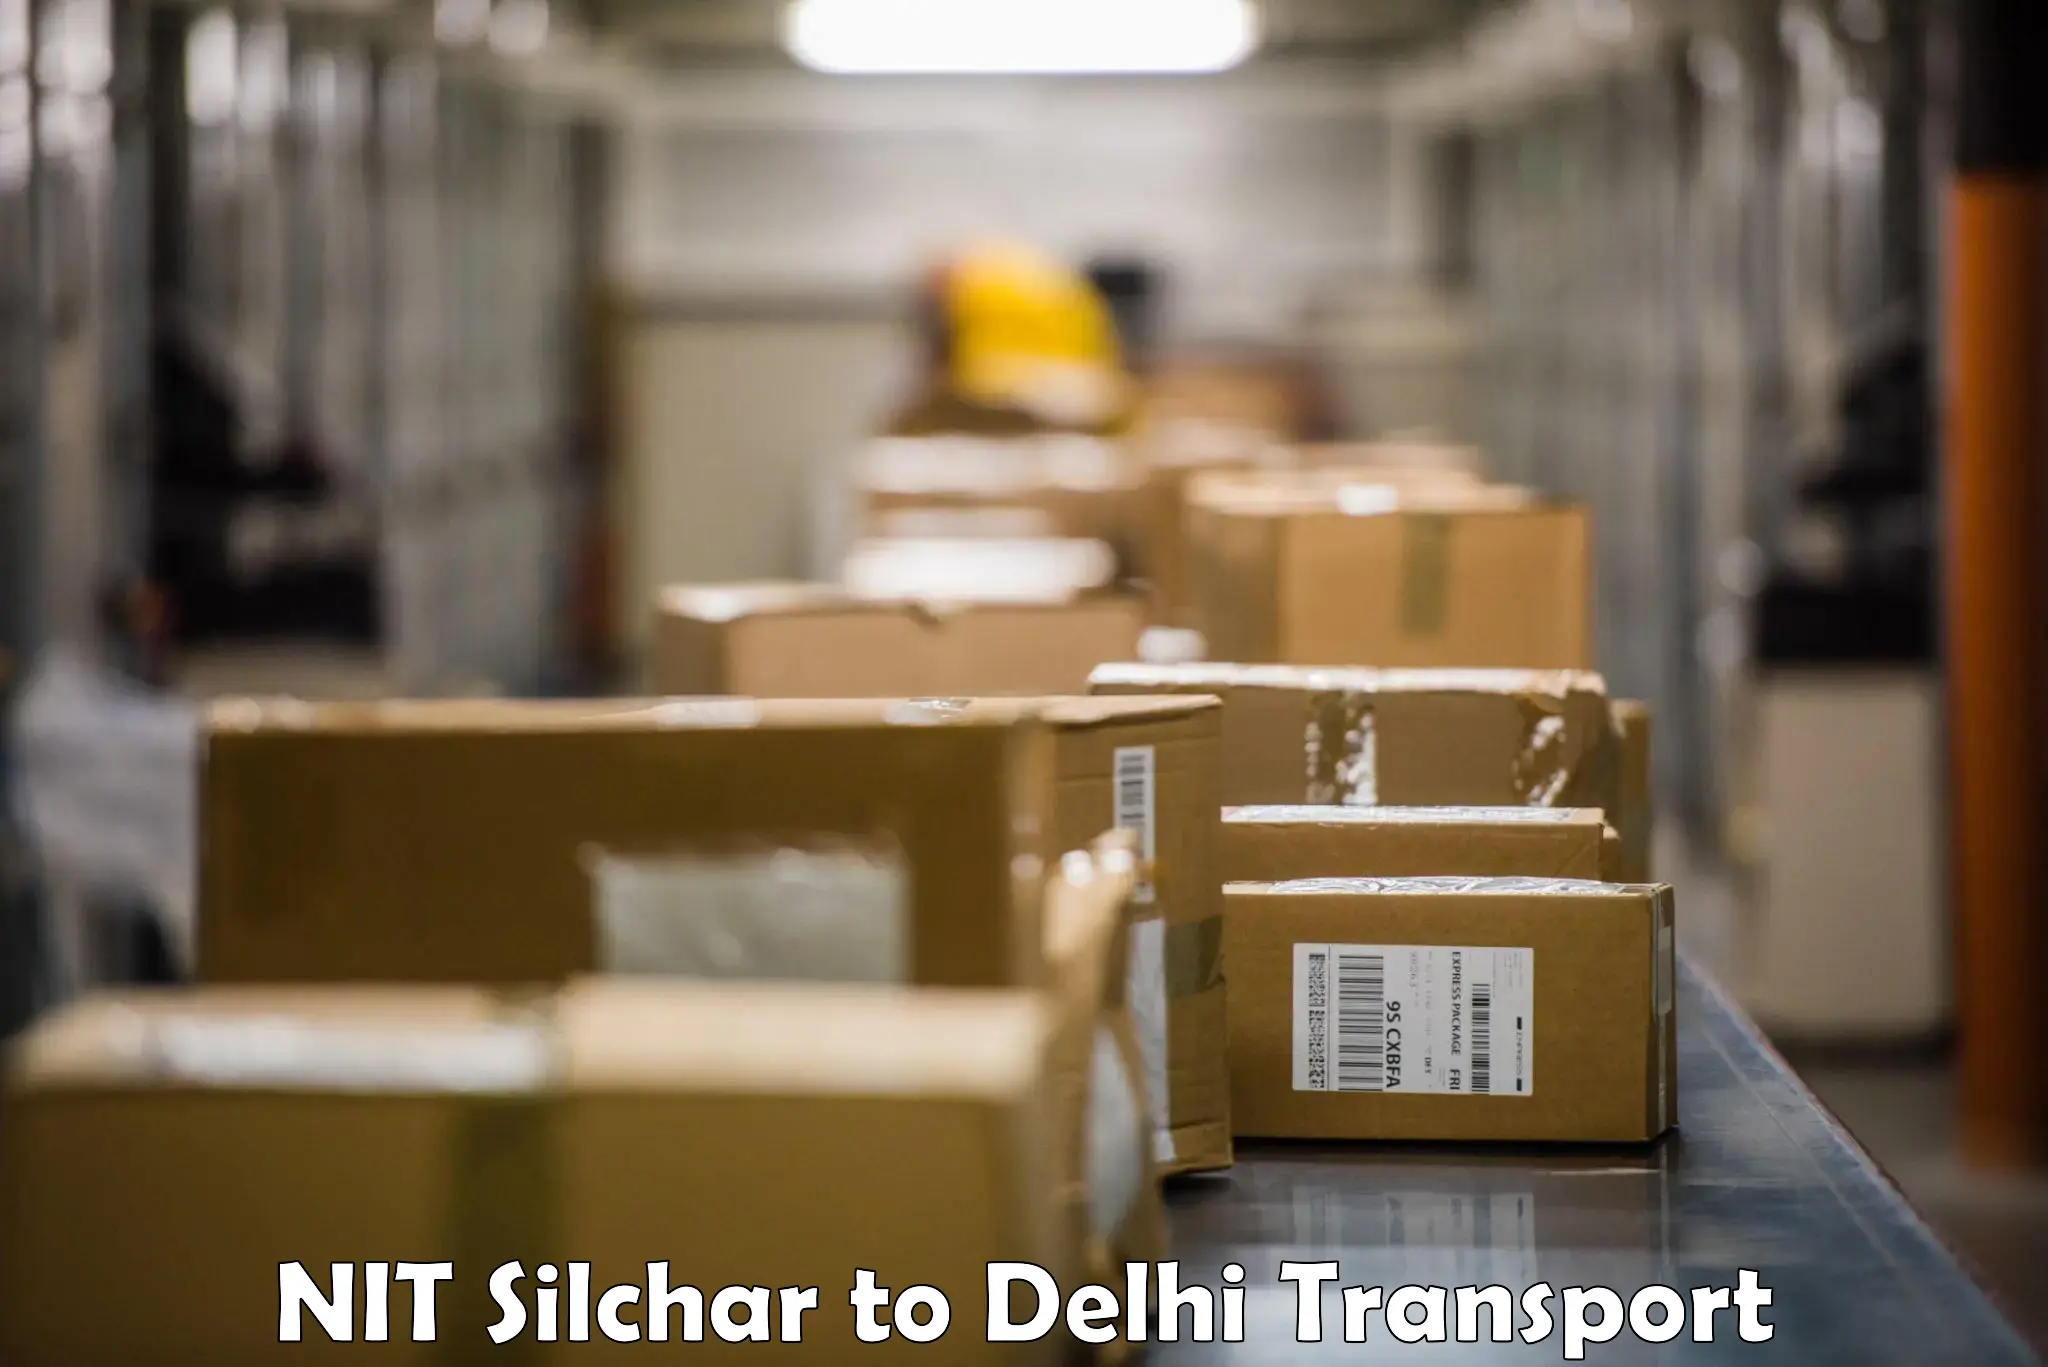 Truck transport companies in India NIT Silchar to NIT Delhi